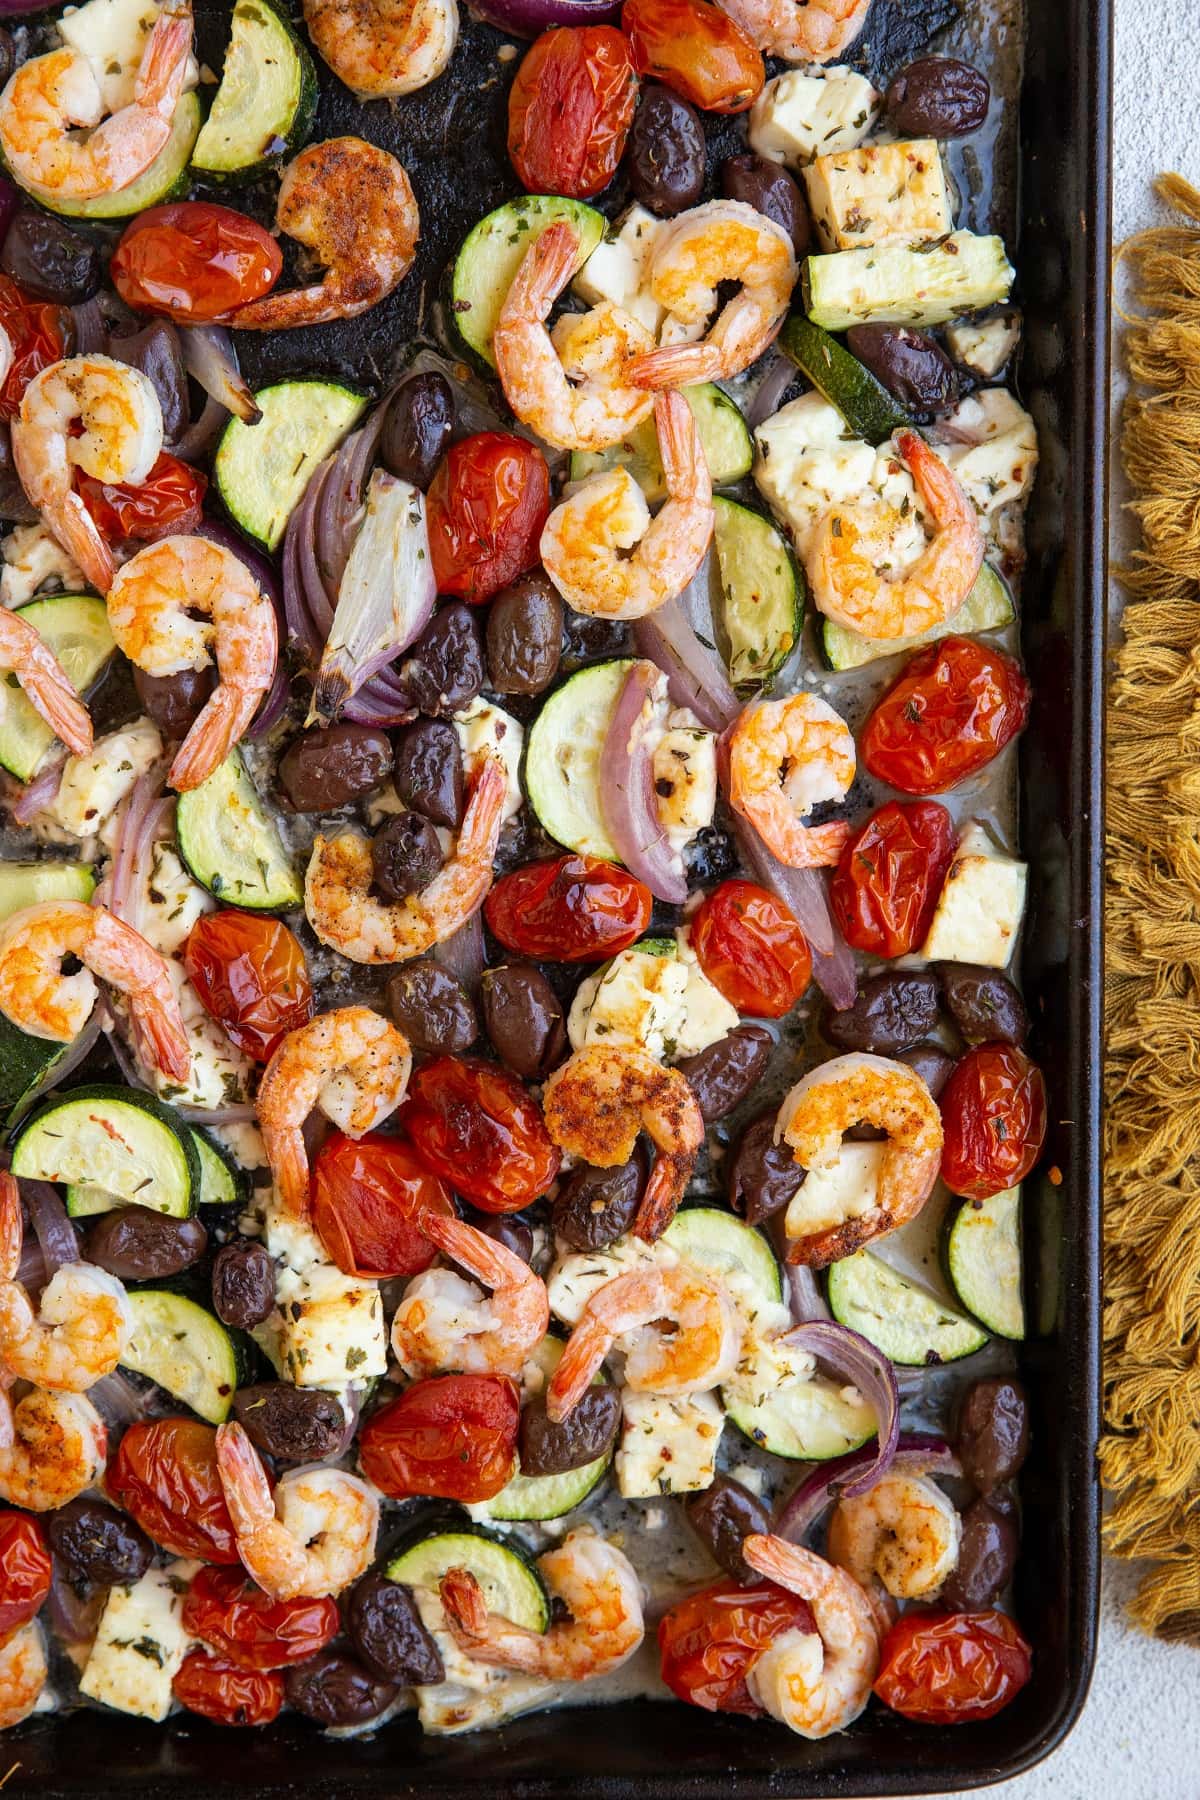 Large baking sheet with shrimp and vegetables for a complete meal, fresh out of the oven.